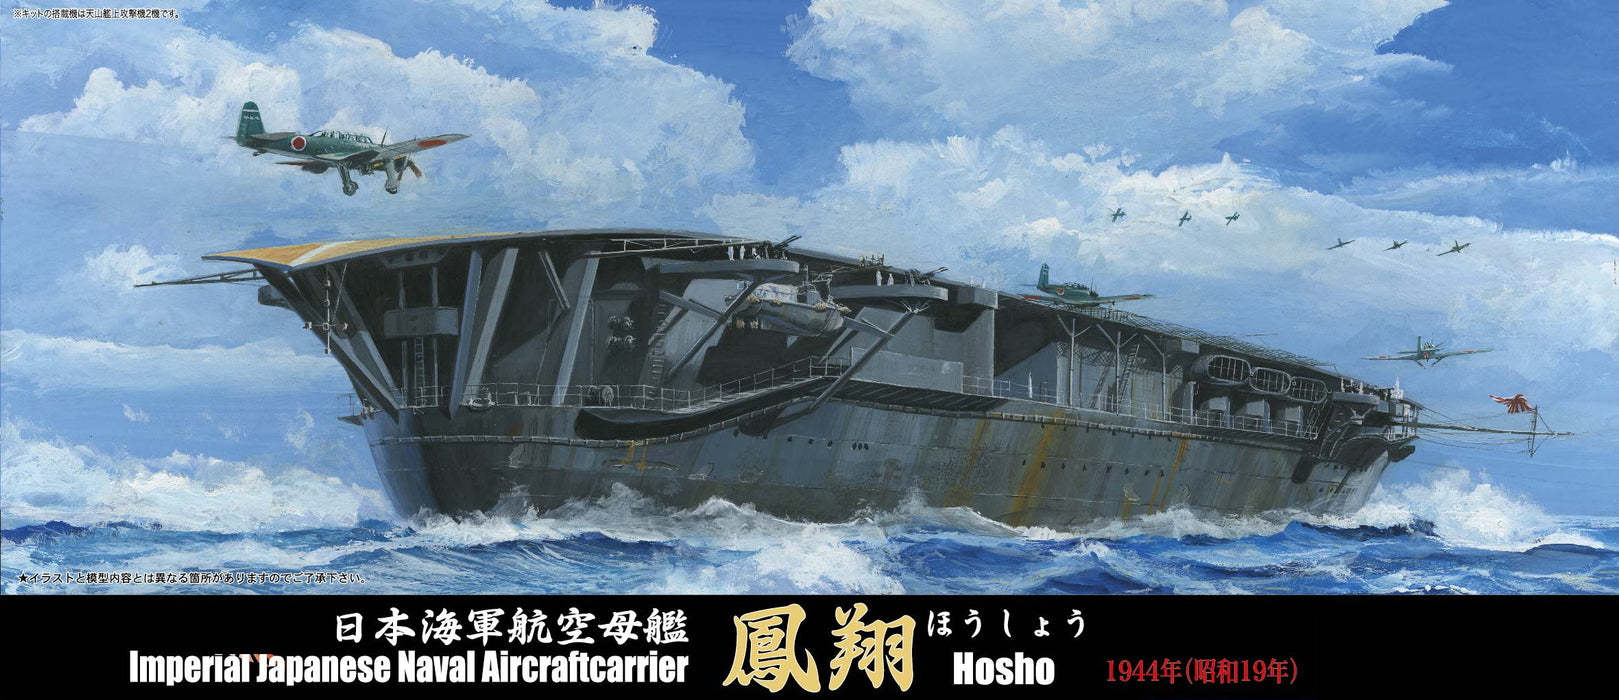 Fujimi Model 1/700 Special Series No.63 Japanese Navy Aircraft Carrier Hosho Showa 19 Plastic Model Special 63